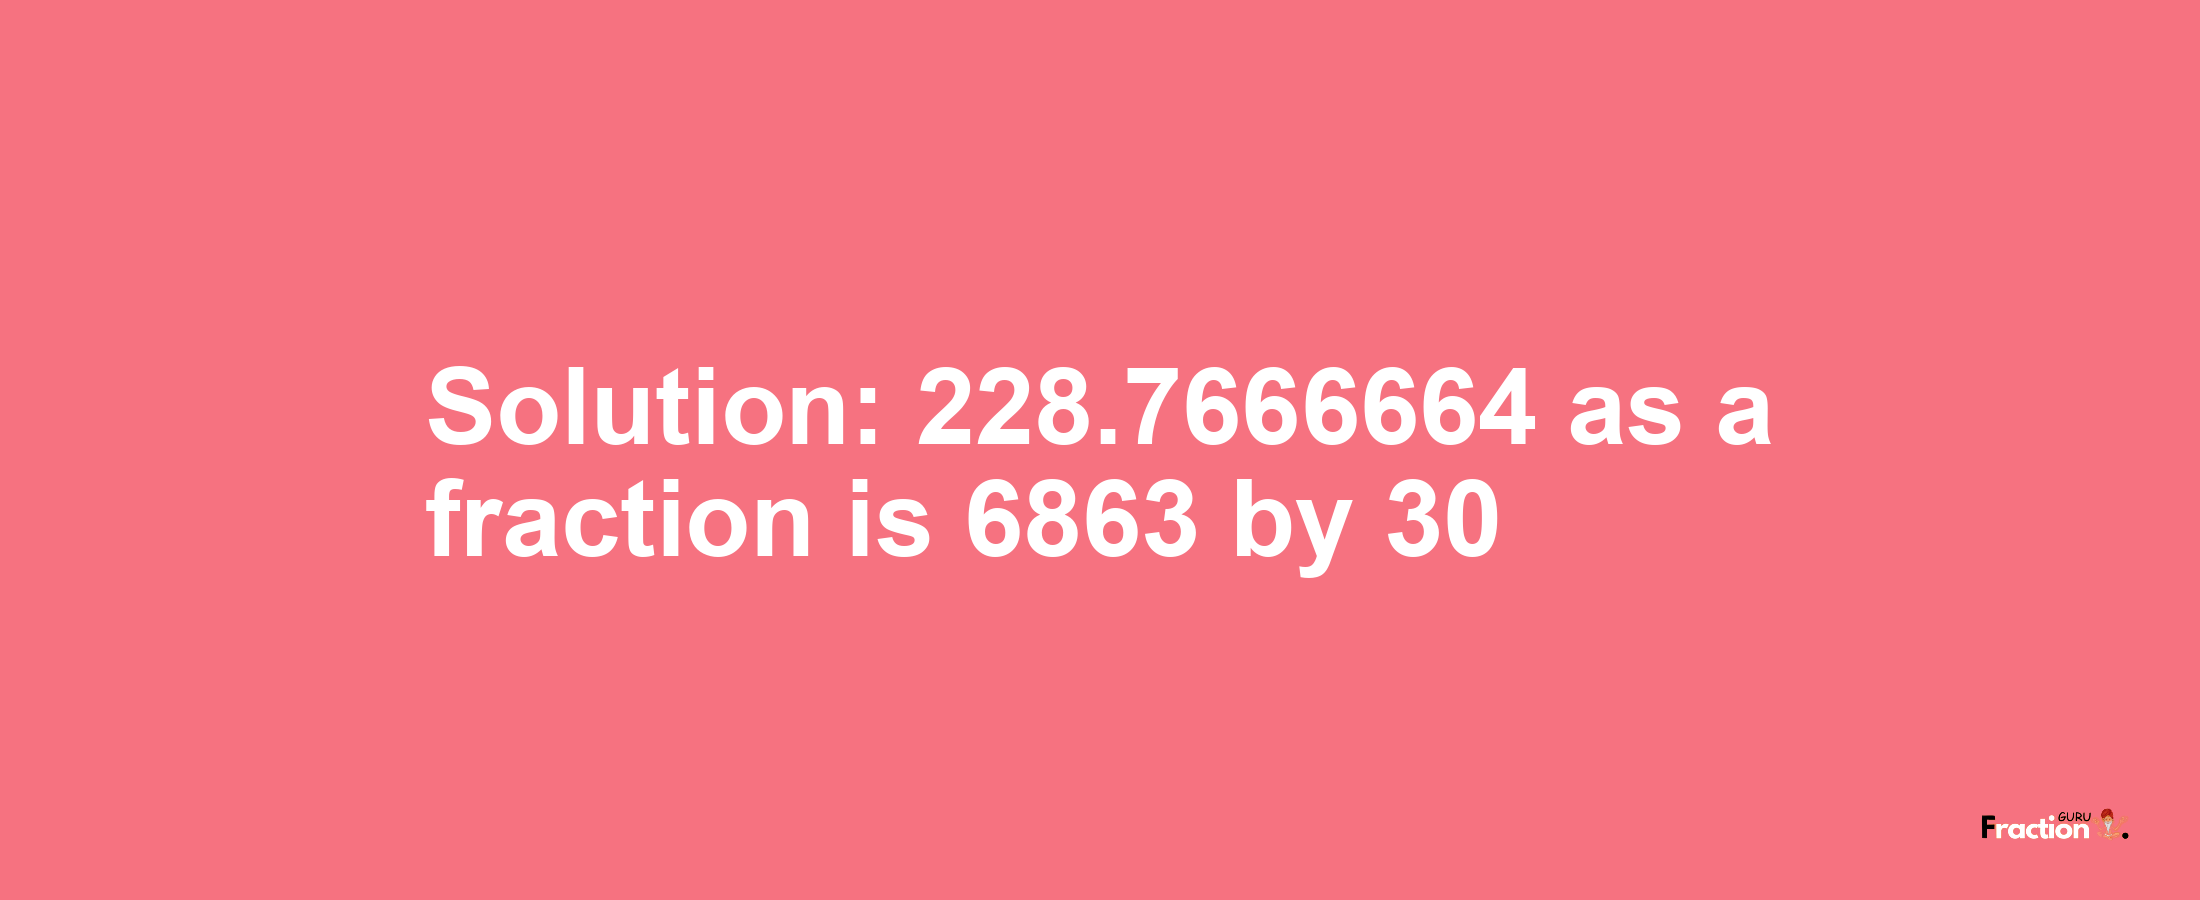 Solution:228.7666664 as a fraction is 6863/30